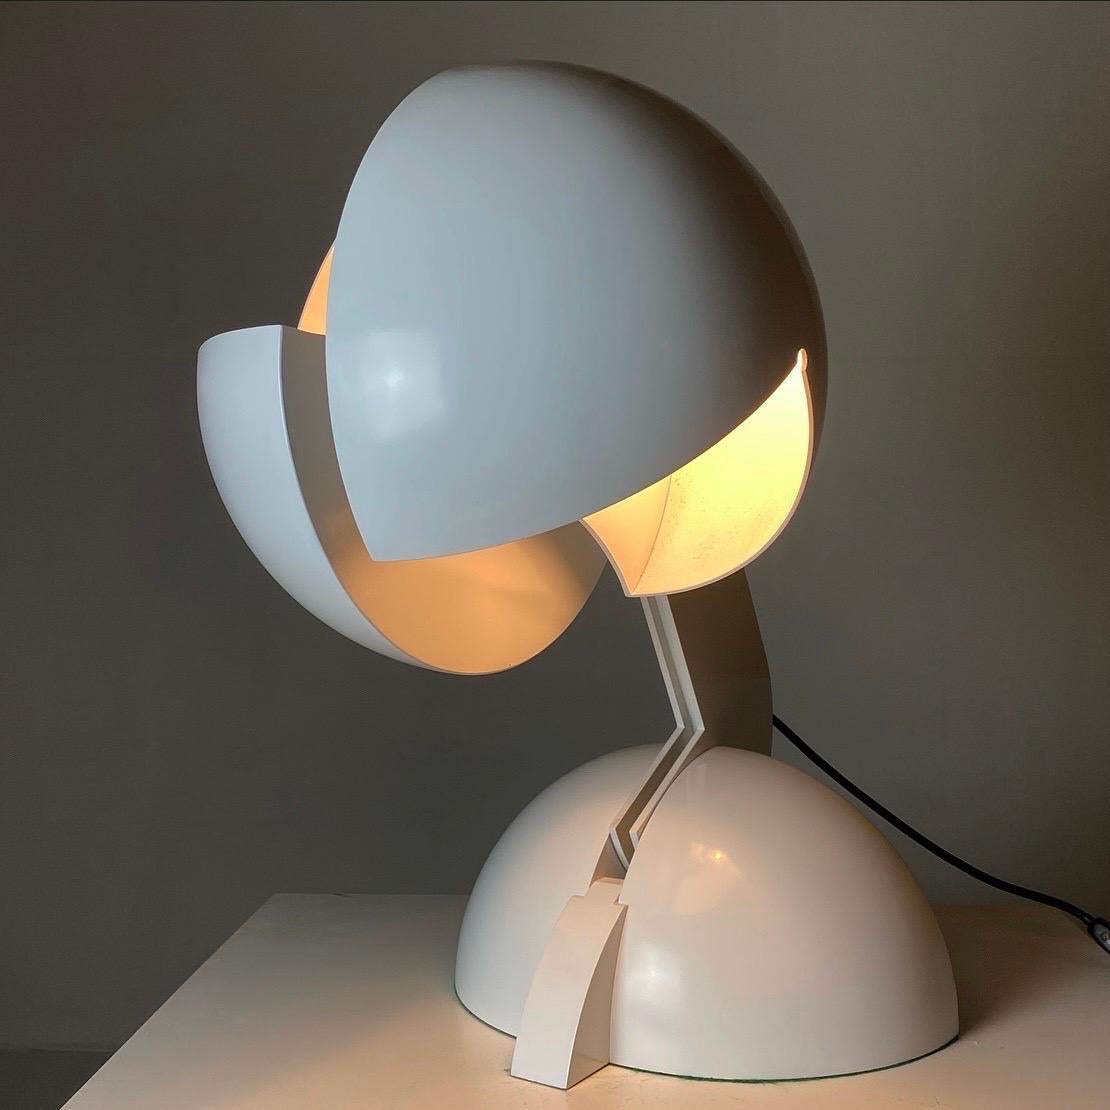 Mid-Century Modern Ruspa Table Lamp by Gae Aulenti for Martinelli Luce, Italy 1970s For Sale